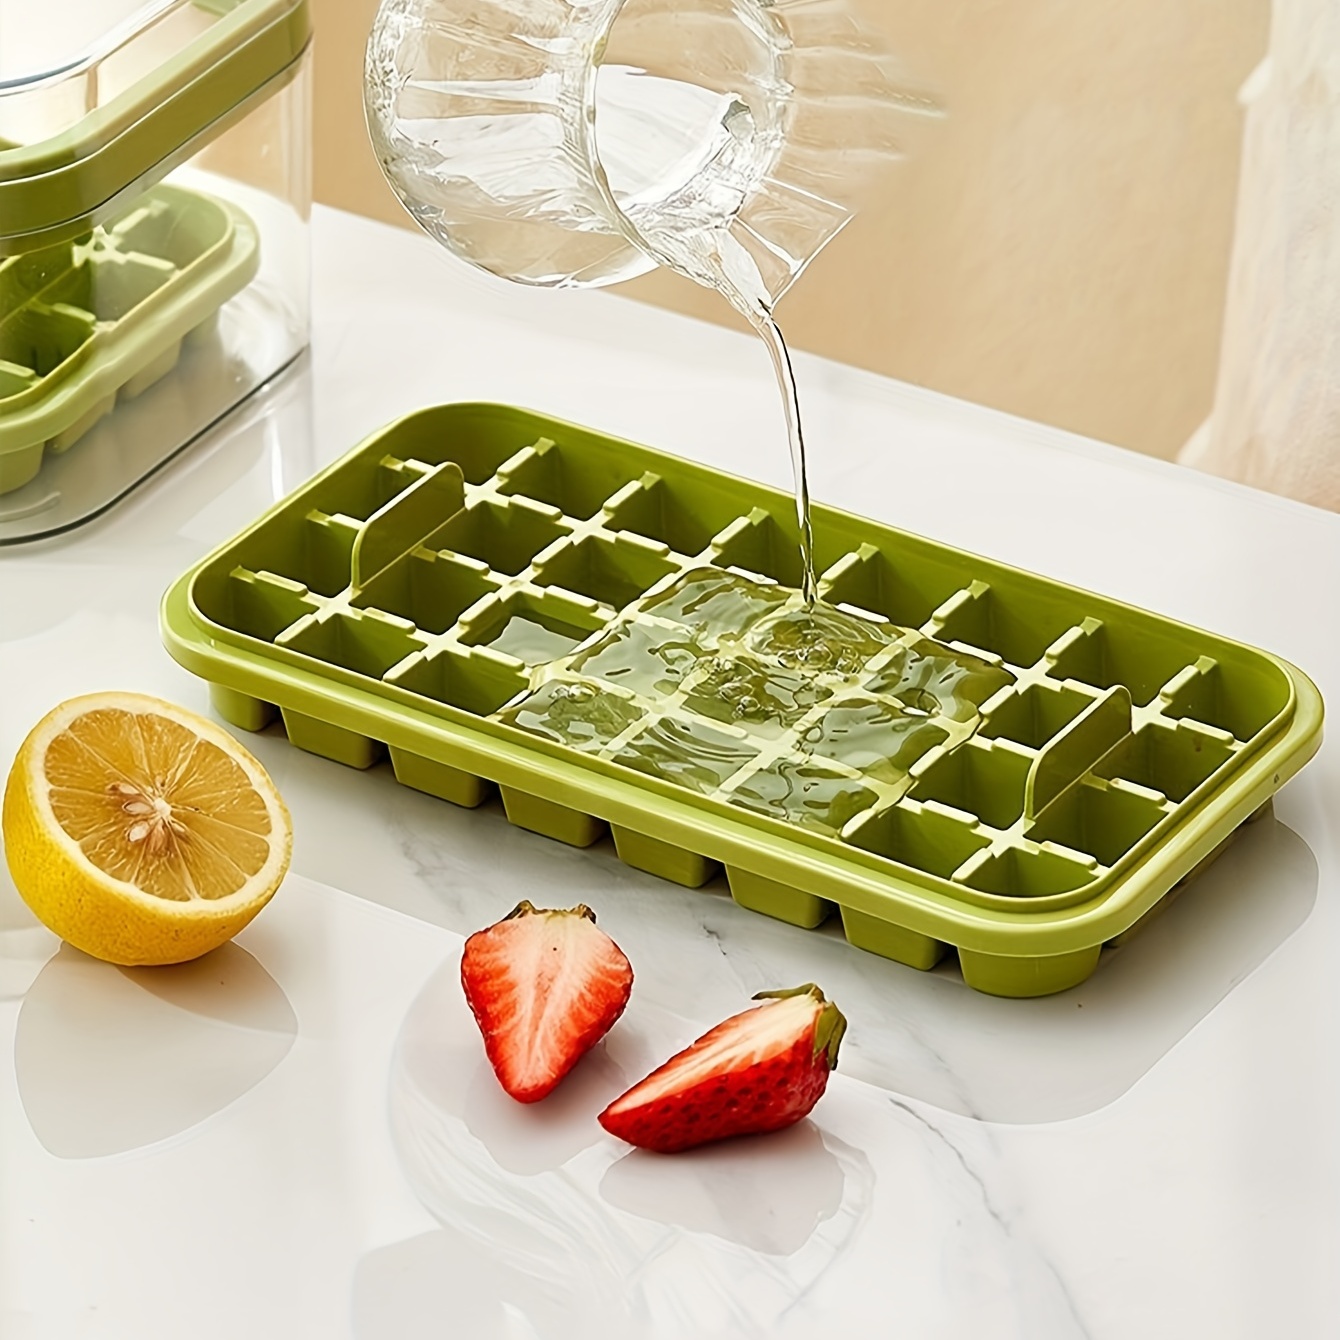 Rubbermaid White Easy-Release Ice Cube Tray